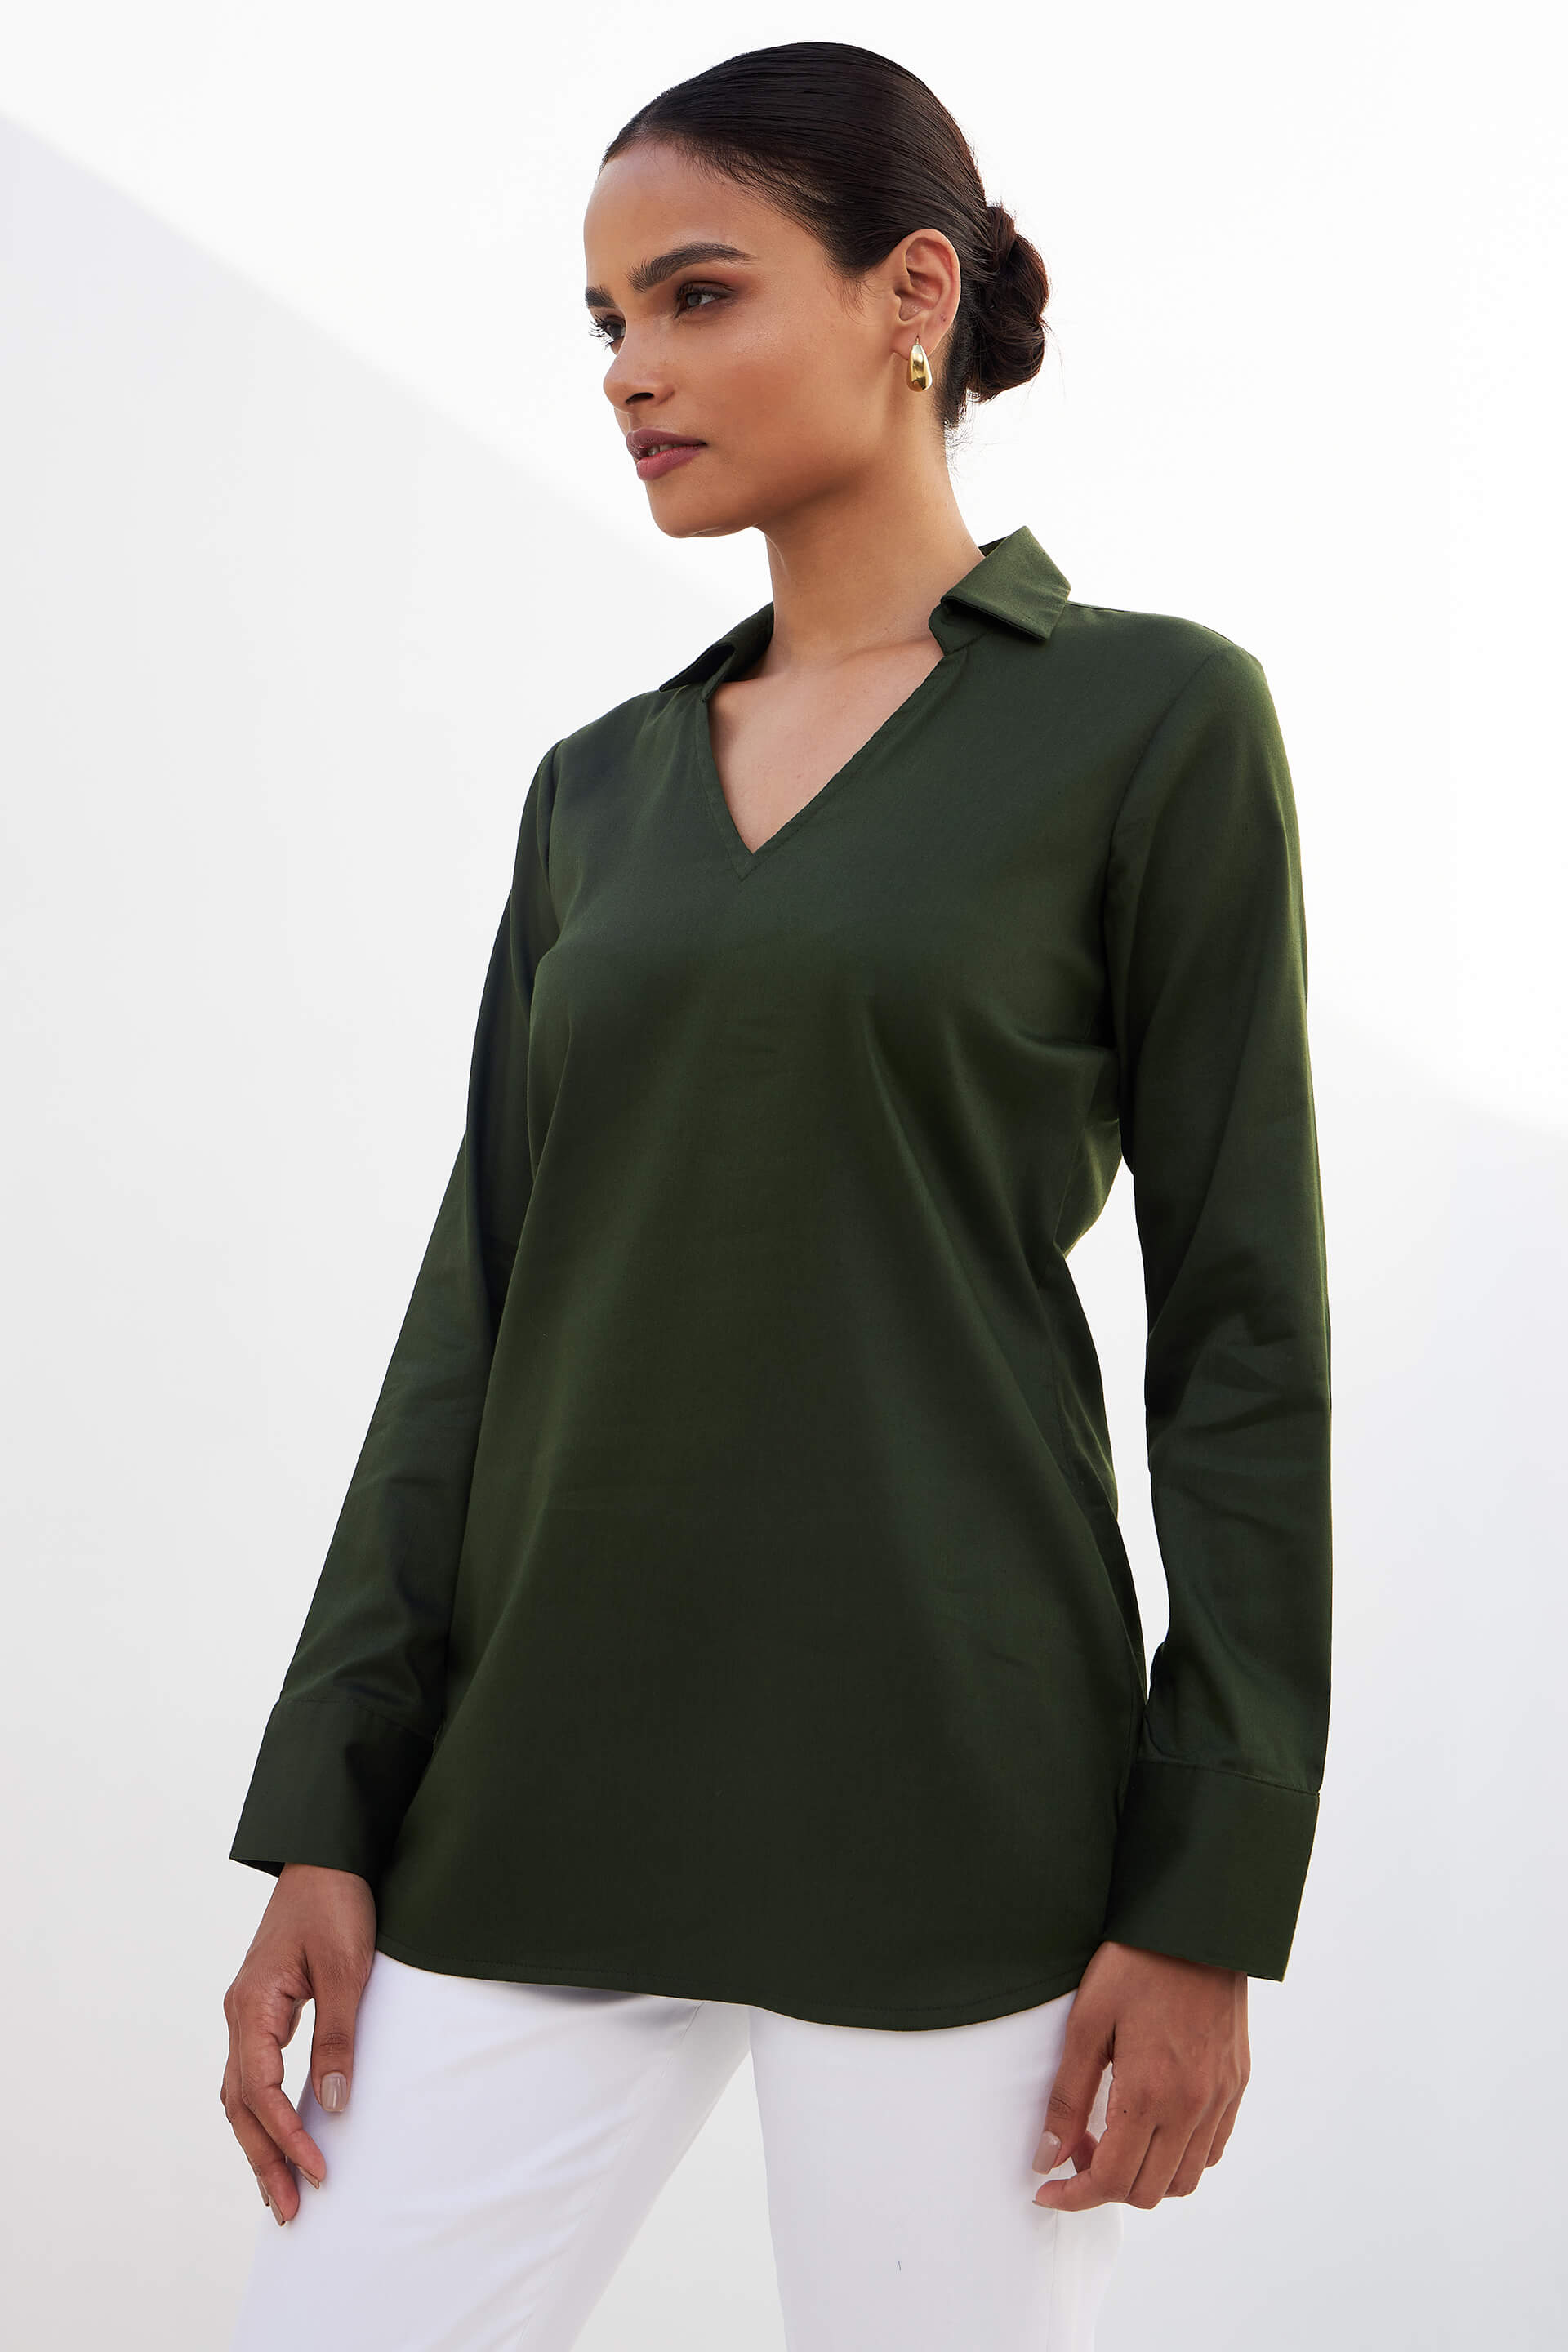 Allure Collared Long Top - Olive